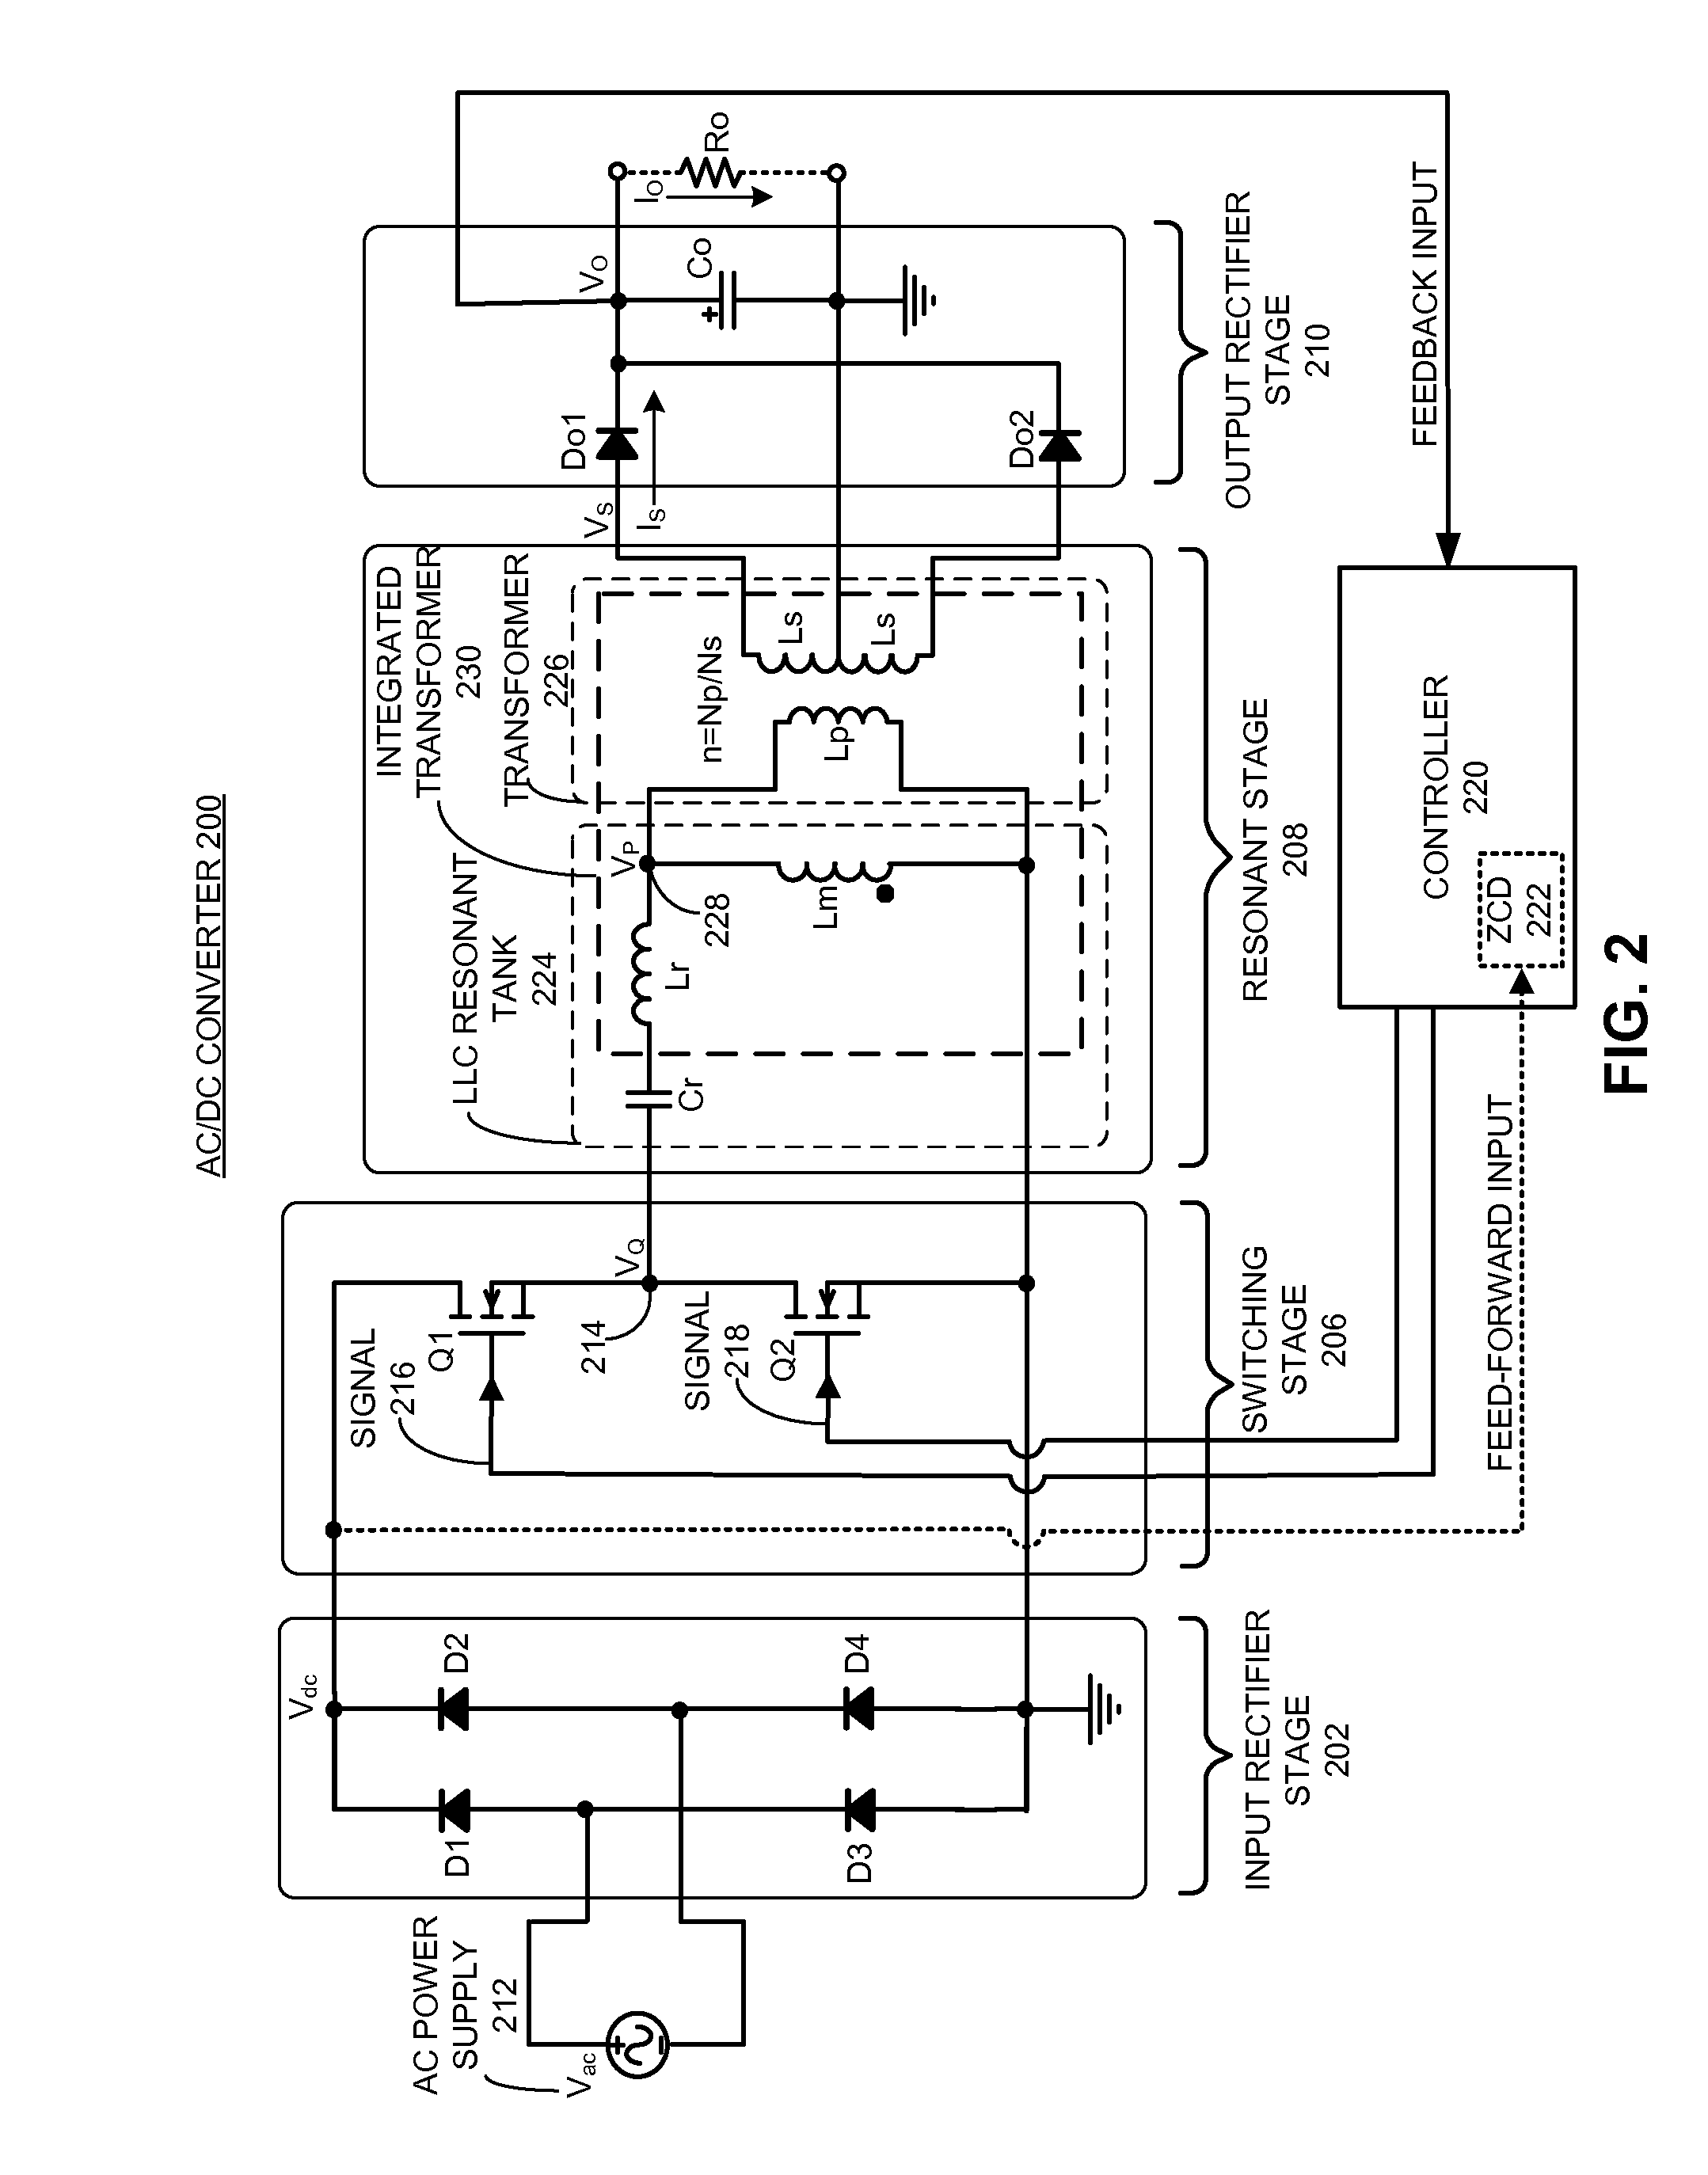 Hysteretic-mode pulse frequency modulated (hm-pfm) resonant ac to DC converter